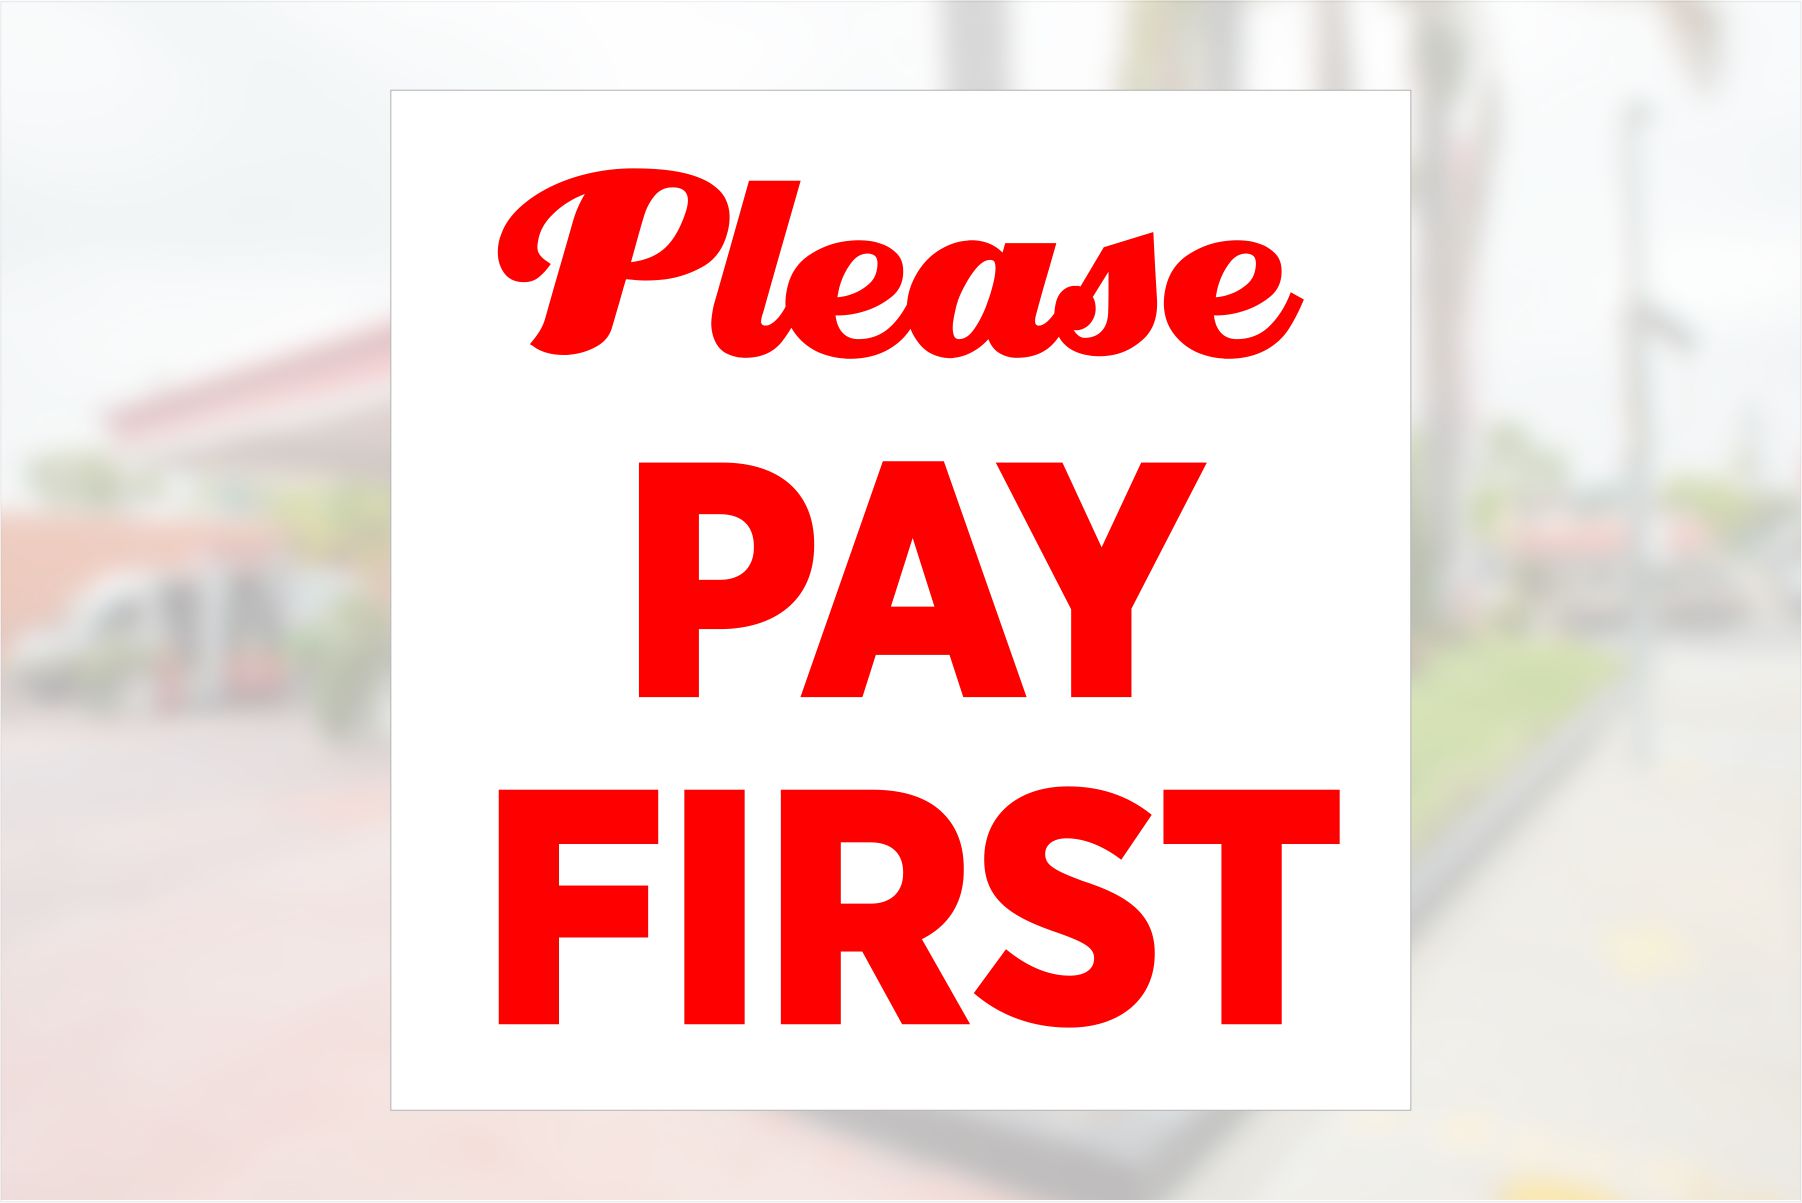 Please Pay First